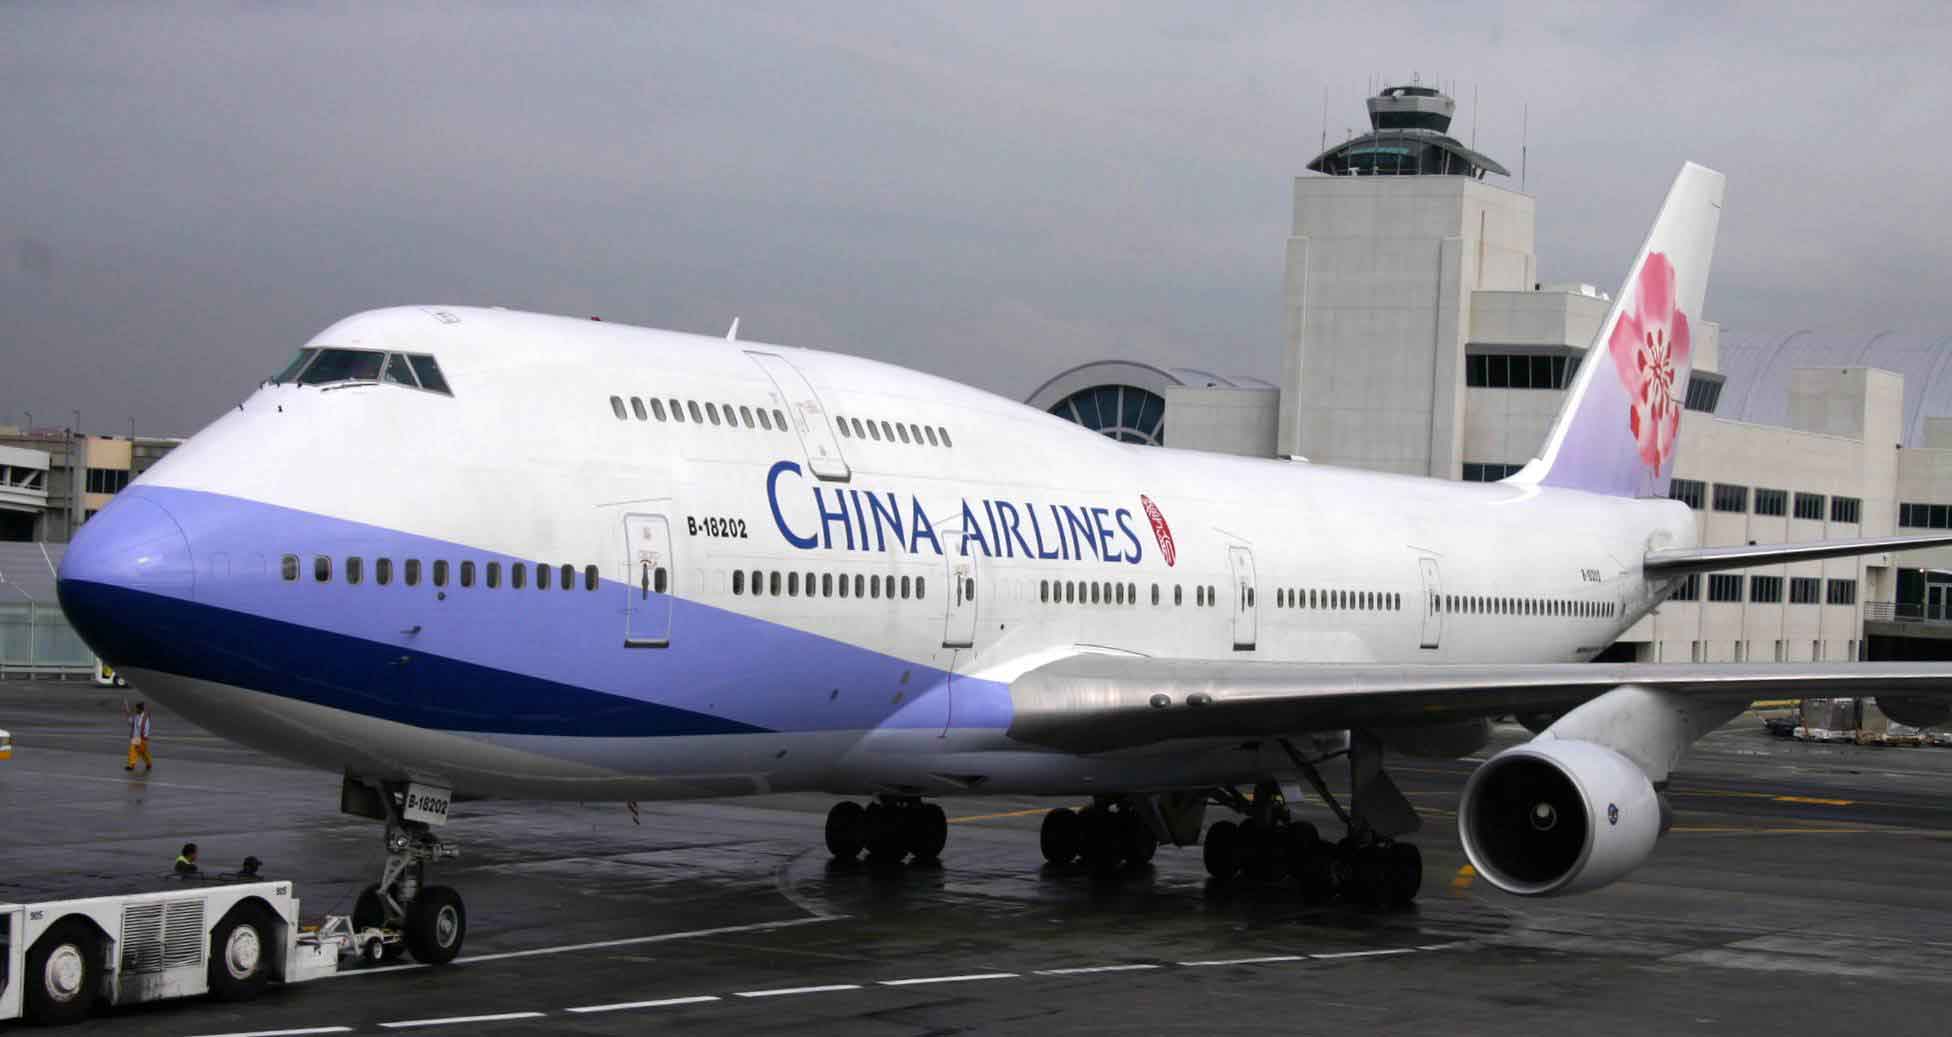 China Airlines to operate direct flights from Taipei, Taiwan to